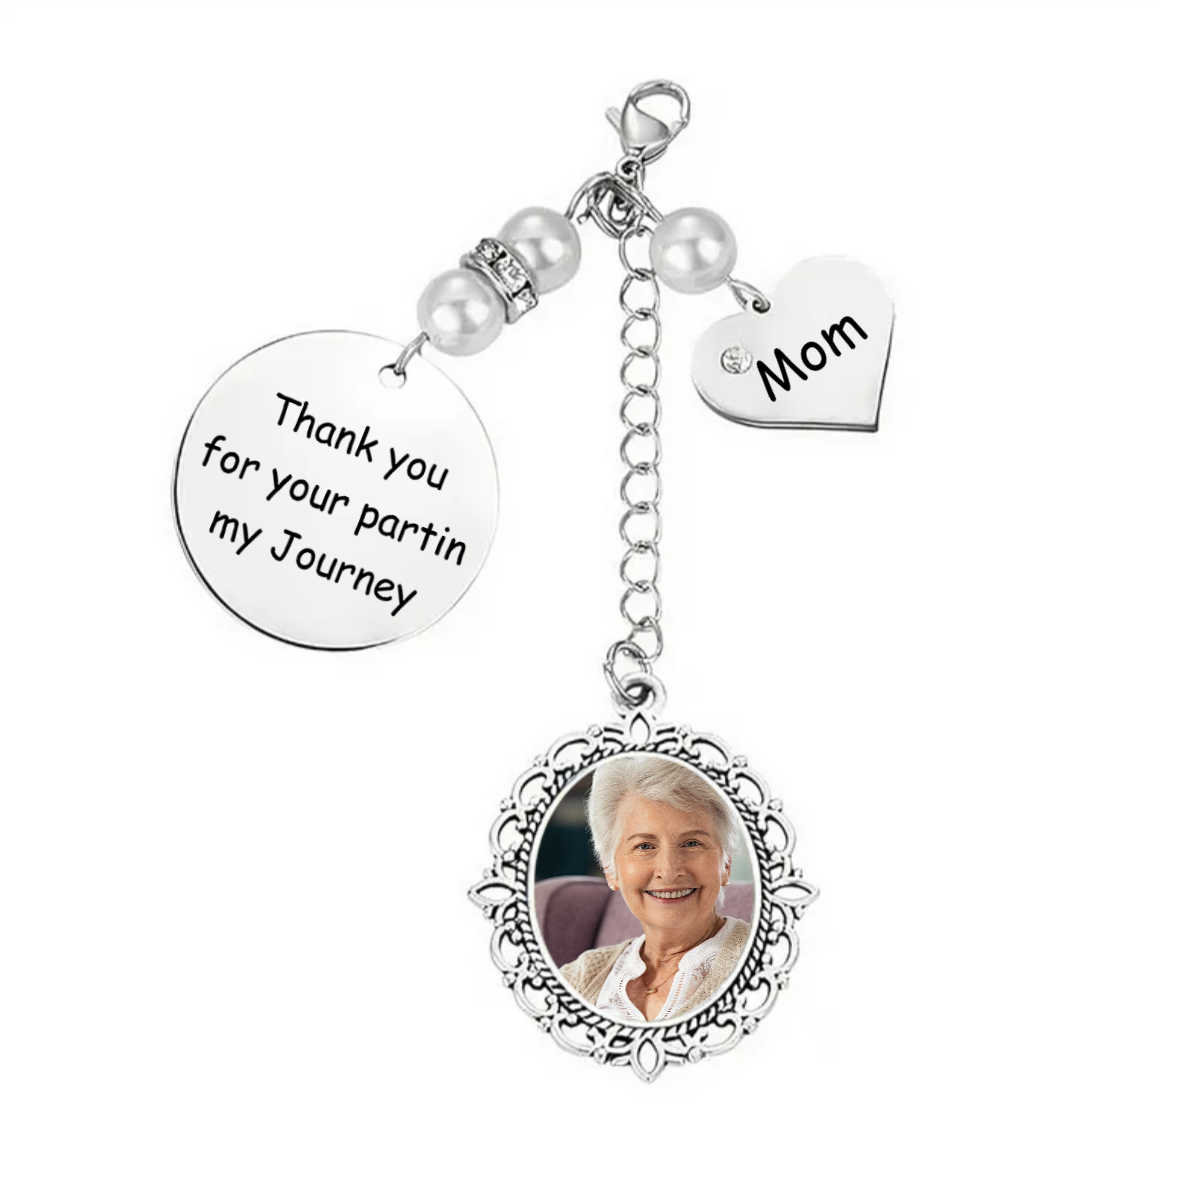 Personalized Wedding Bouquet Lacy Oval Charm With Photo and Heart Shaped Pendant